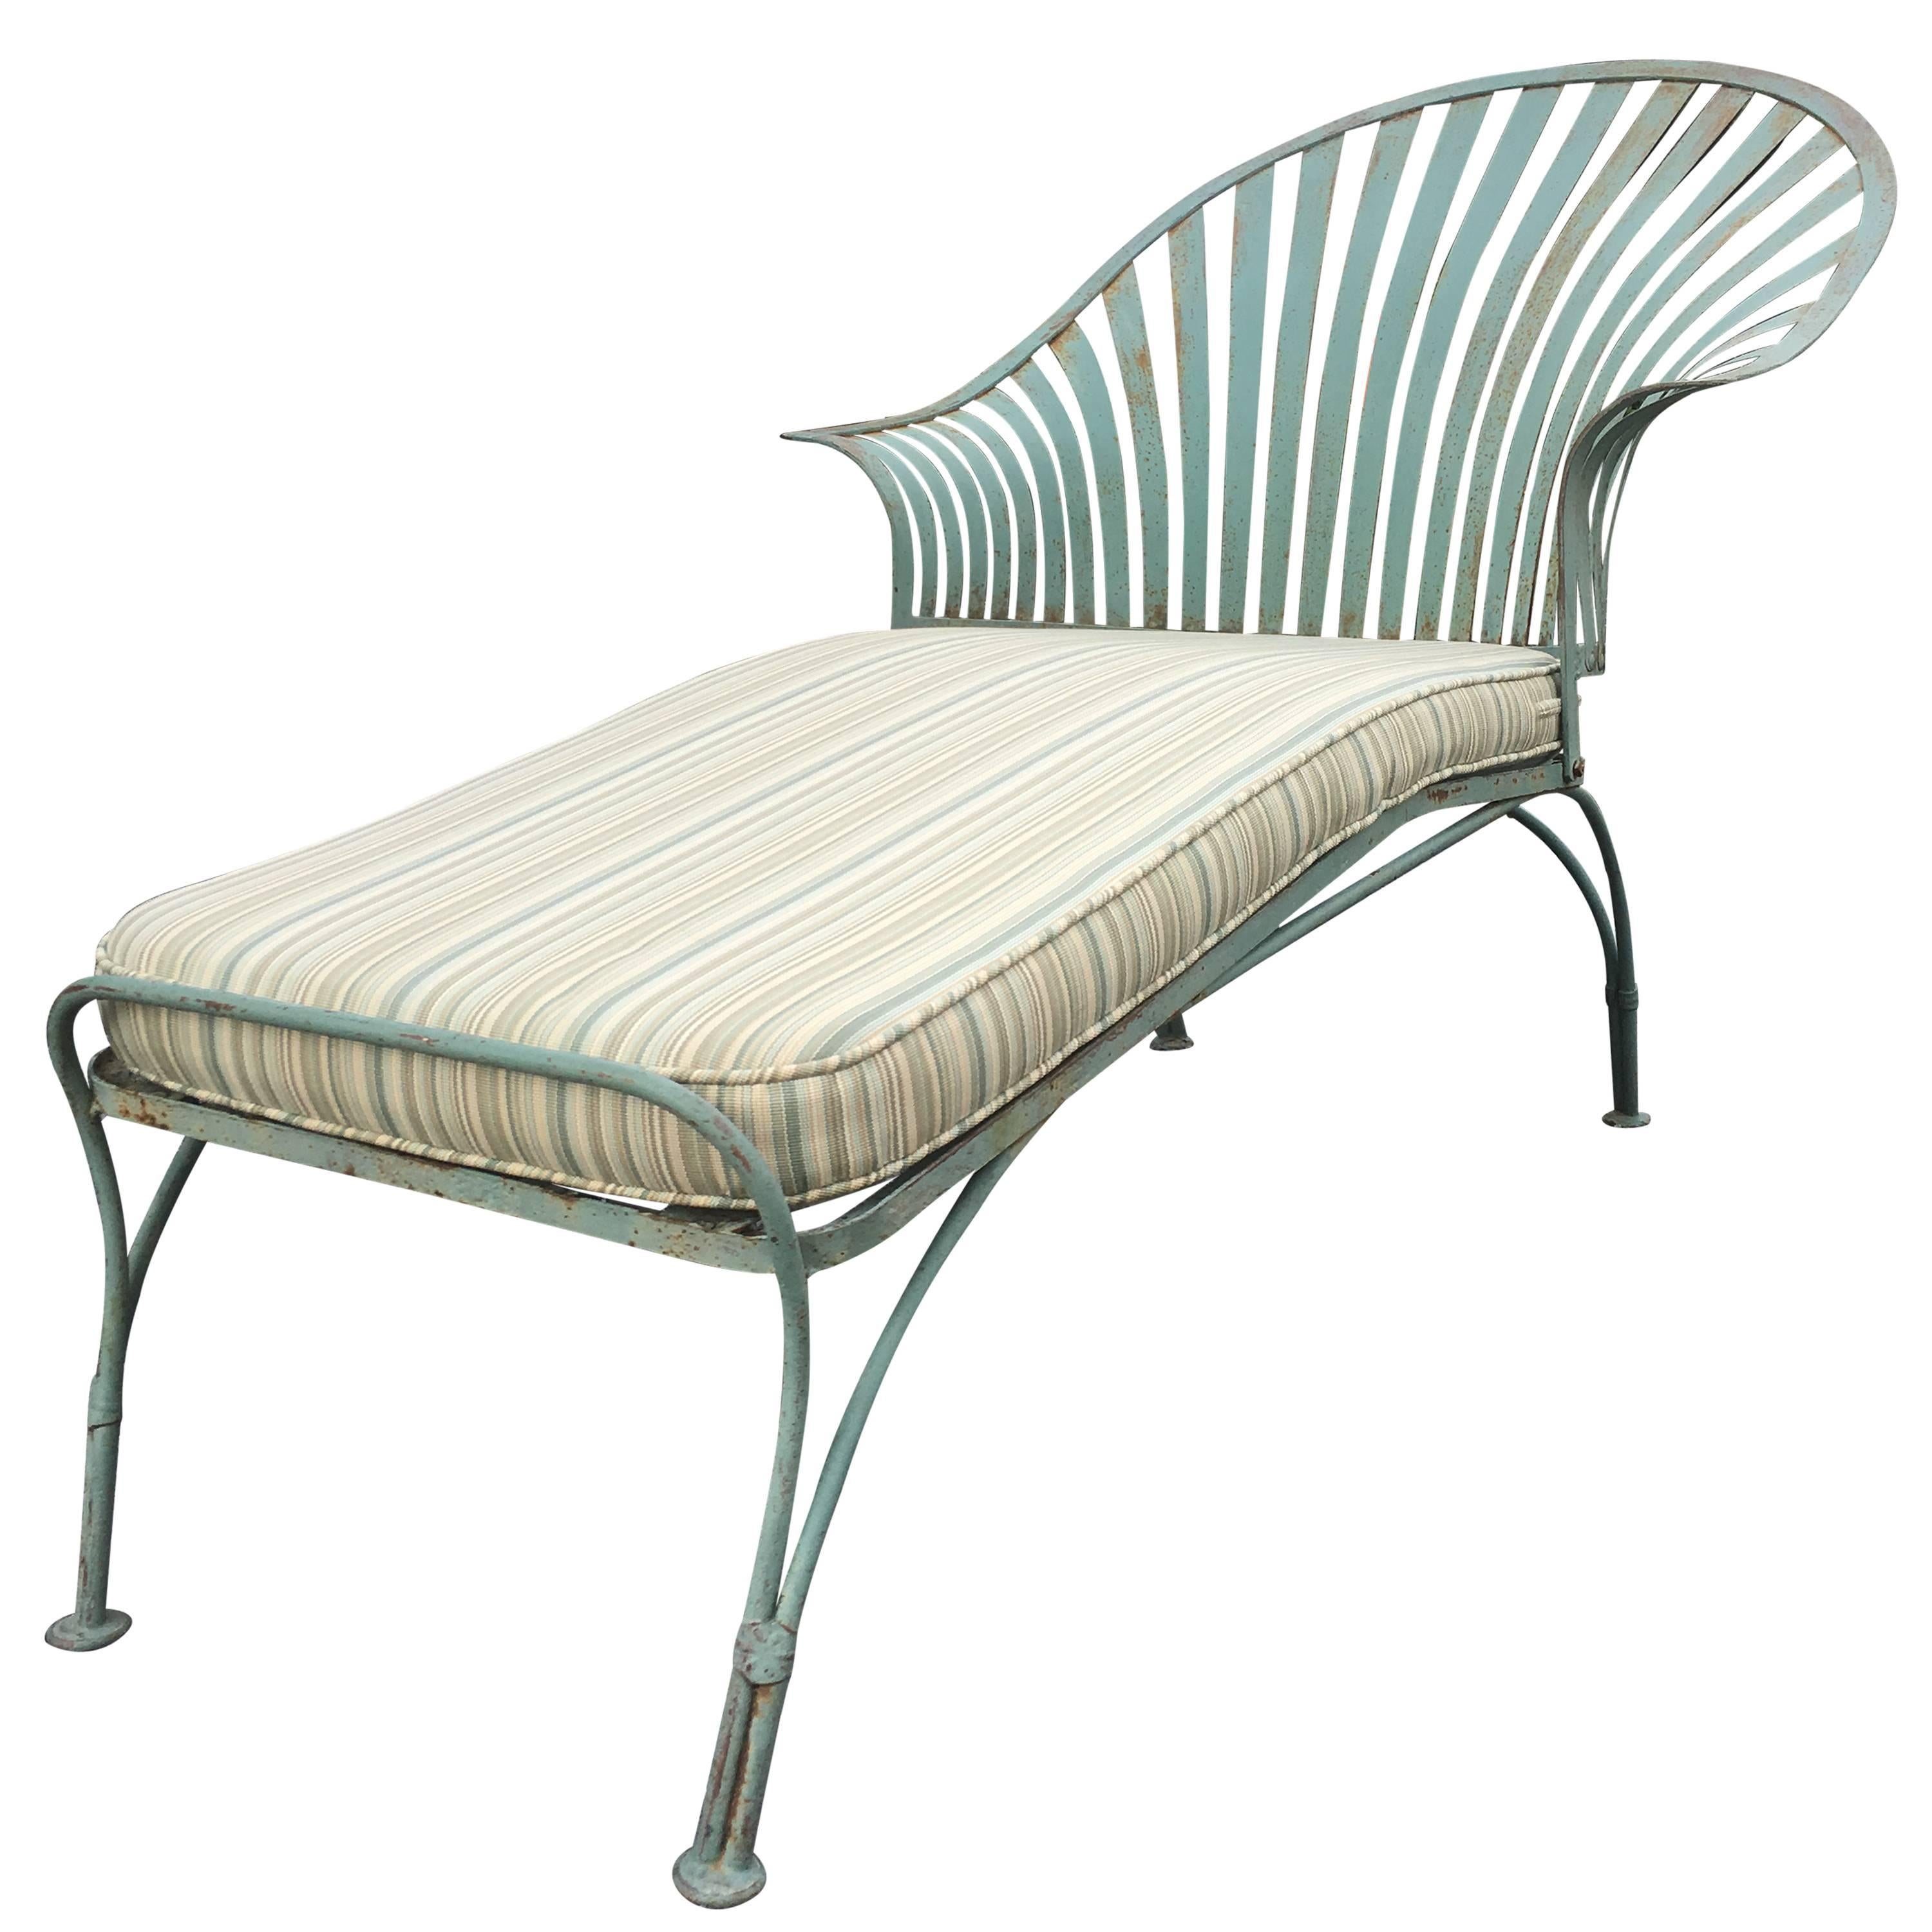 Francois Carre Spring Steel Chaise Lounge